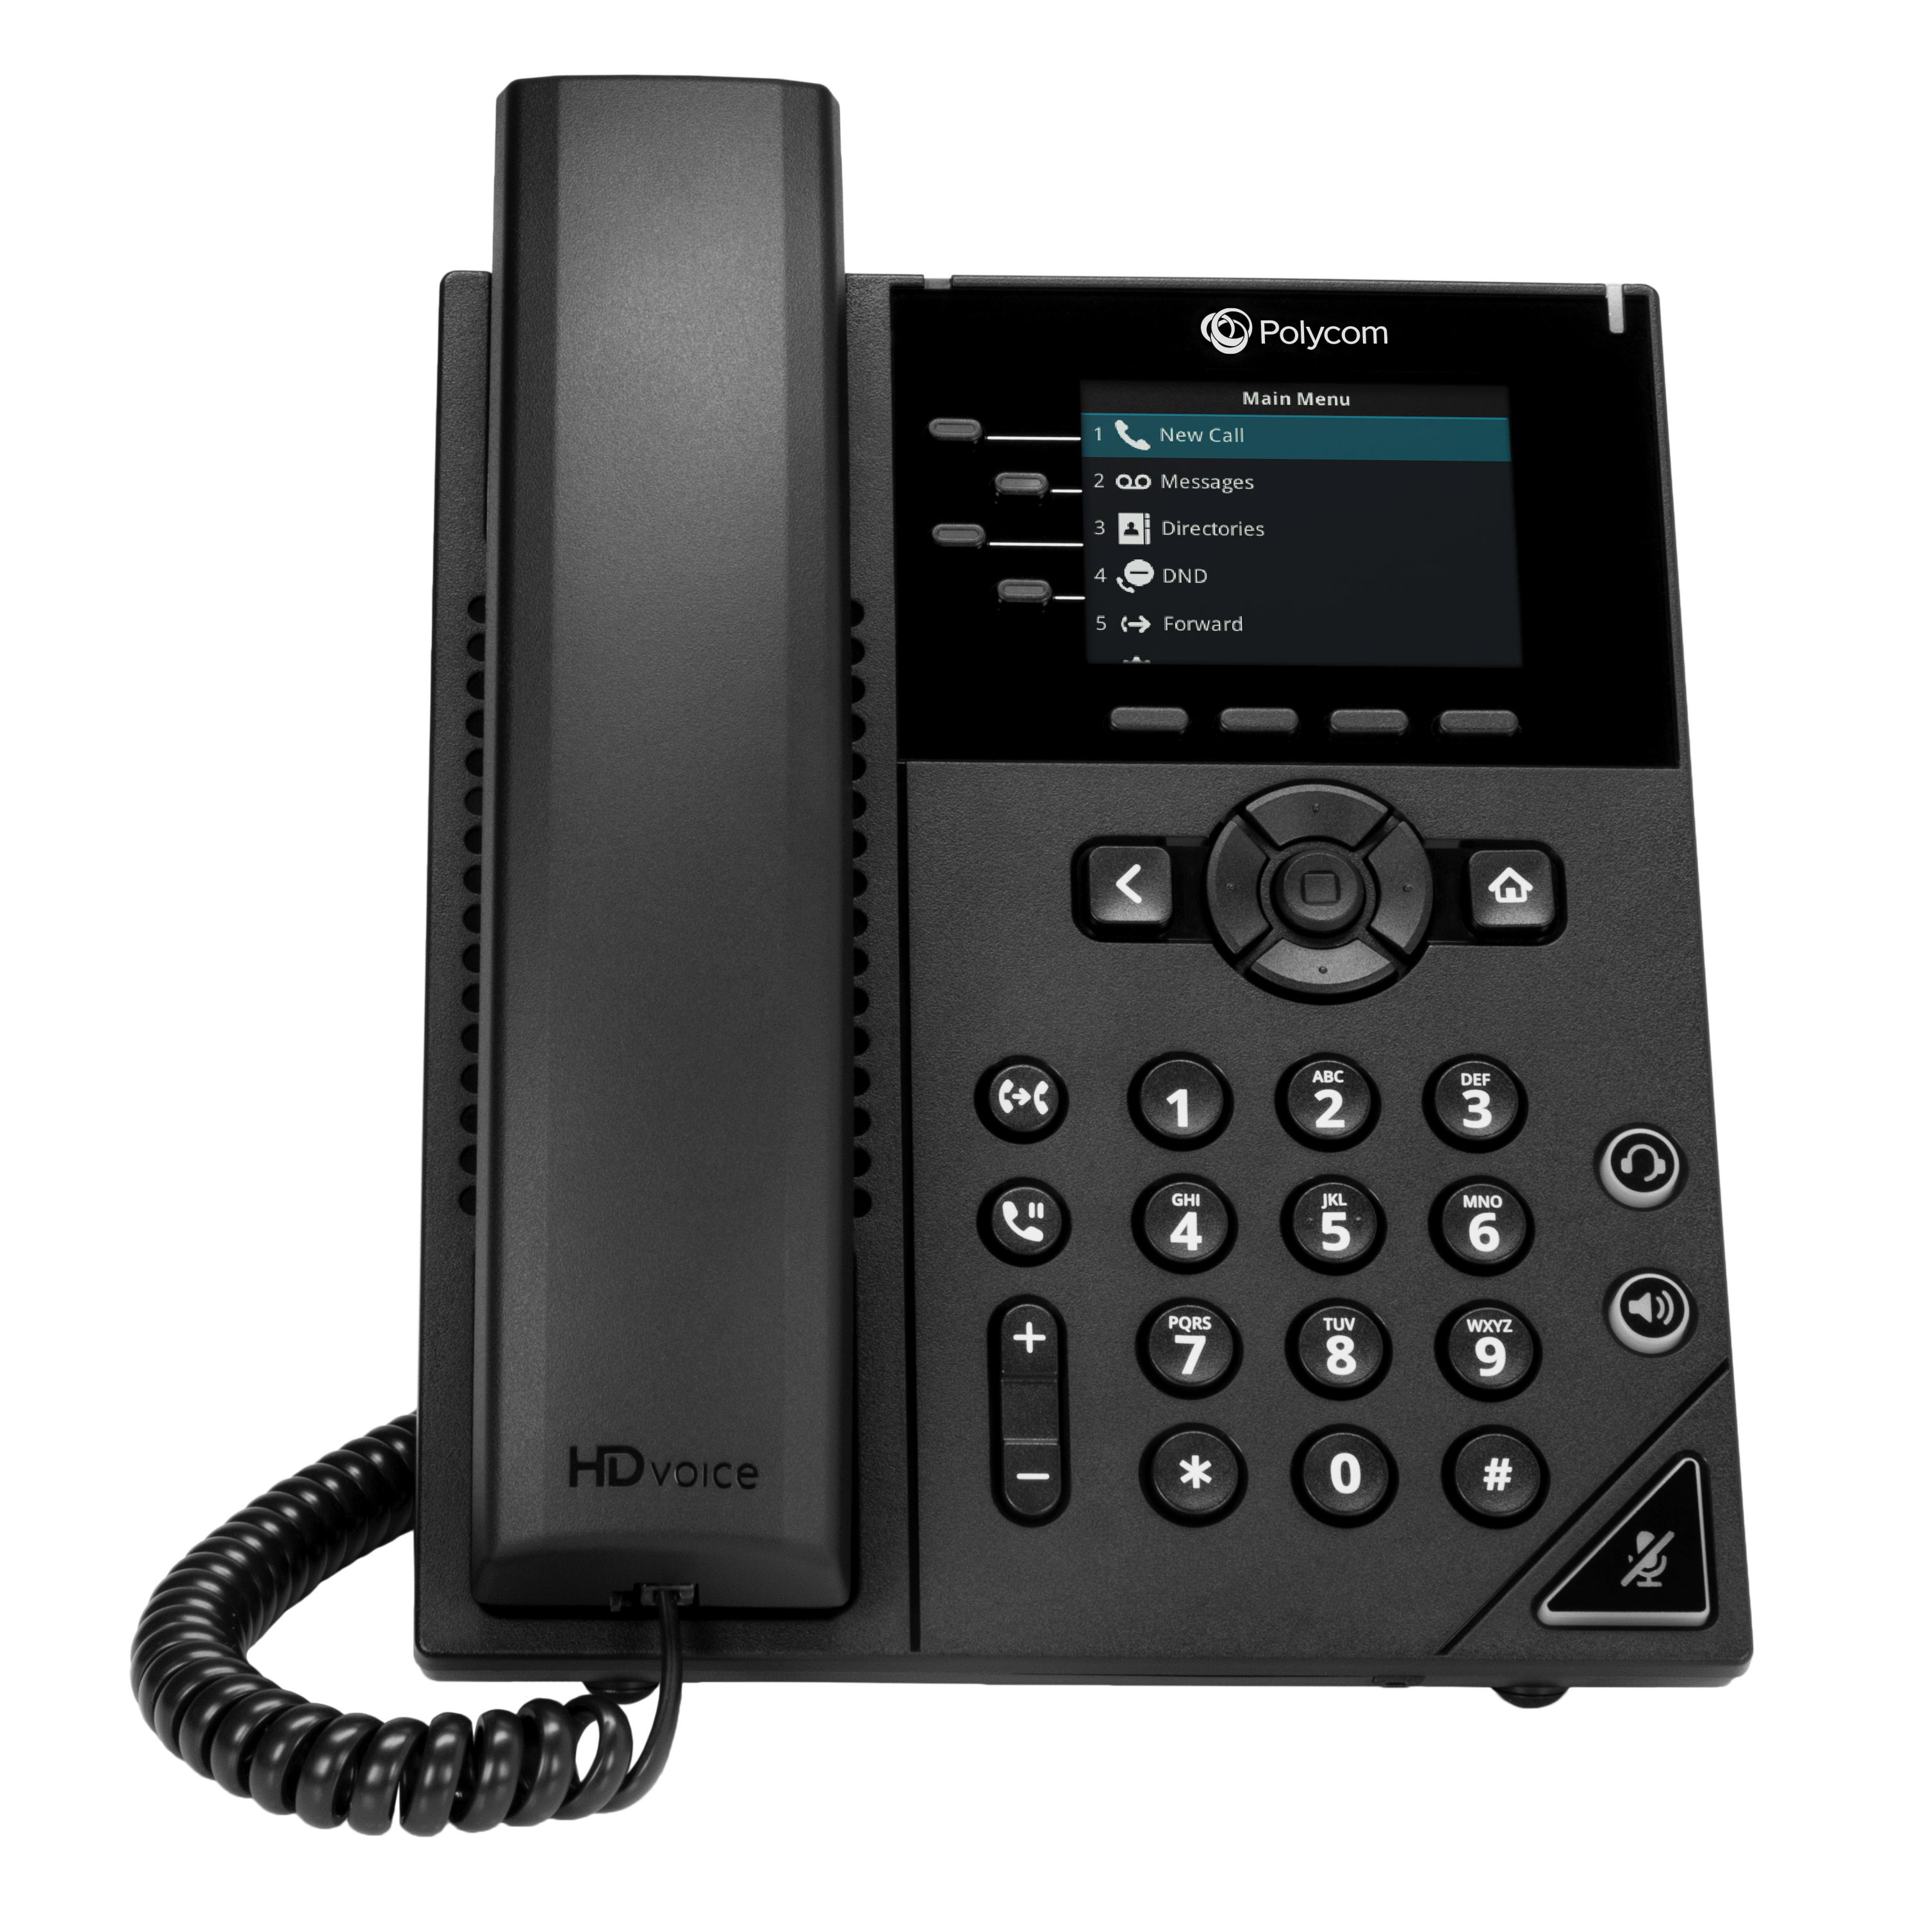 image of the Connected Voice phone